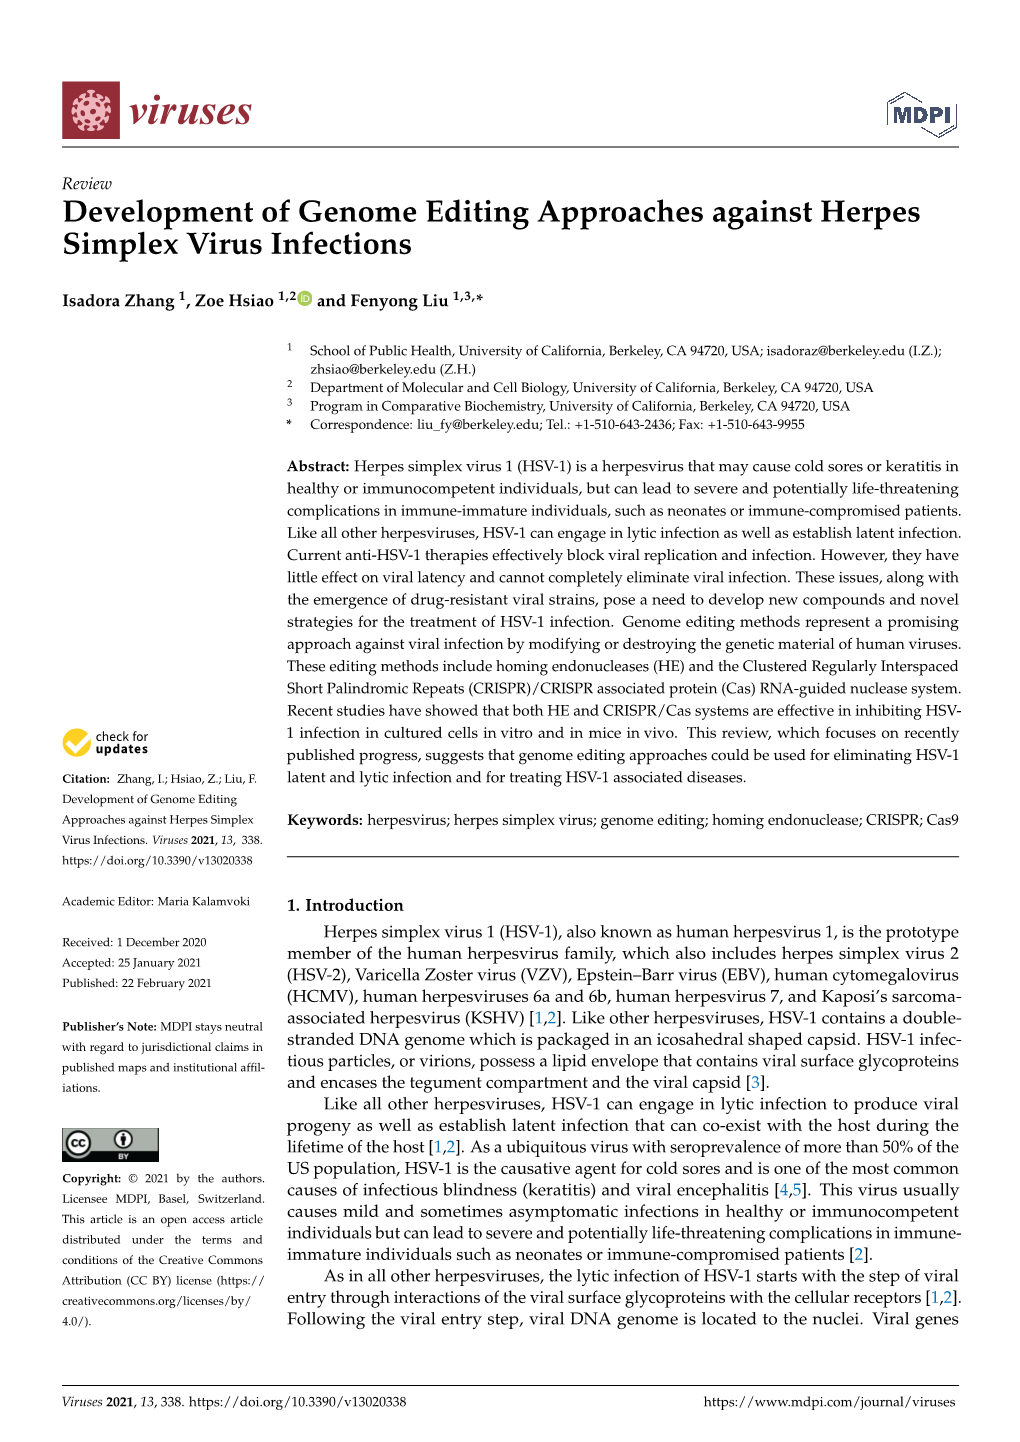 Development of Genome Editing Approaches Against Herpes Simplex Virus Infections